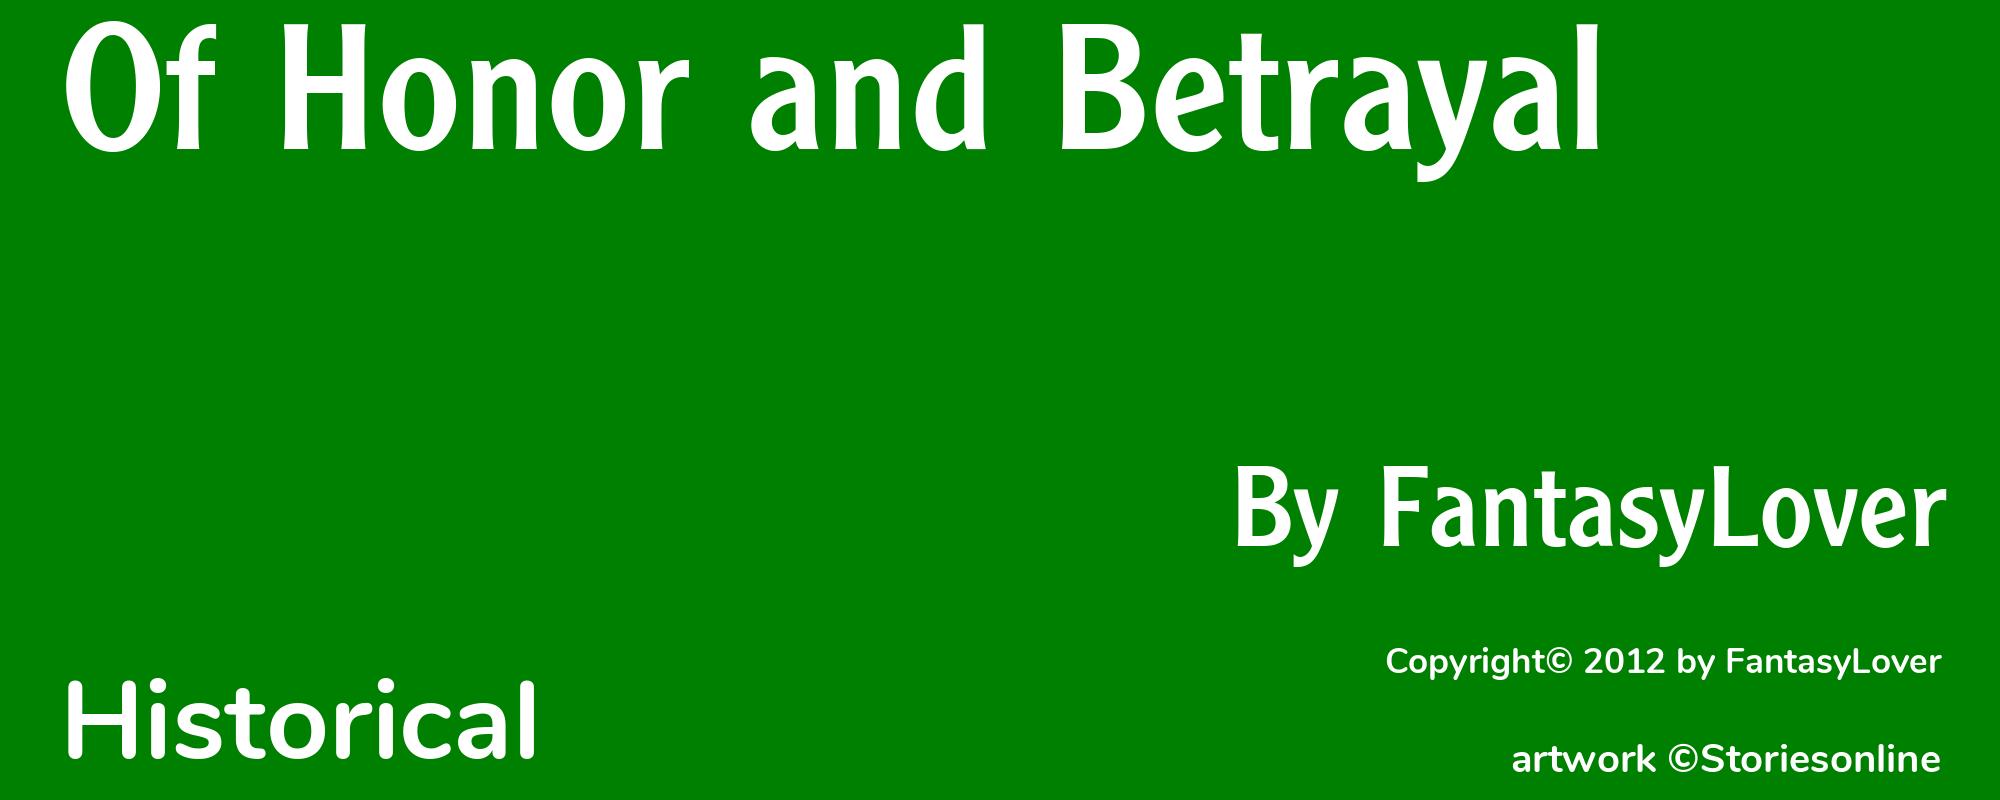 Of Honor and Betrayal - Cover